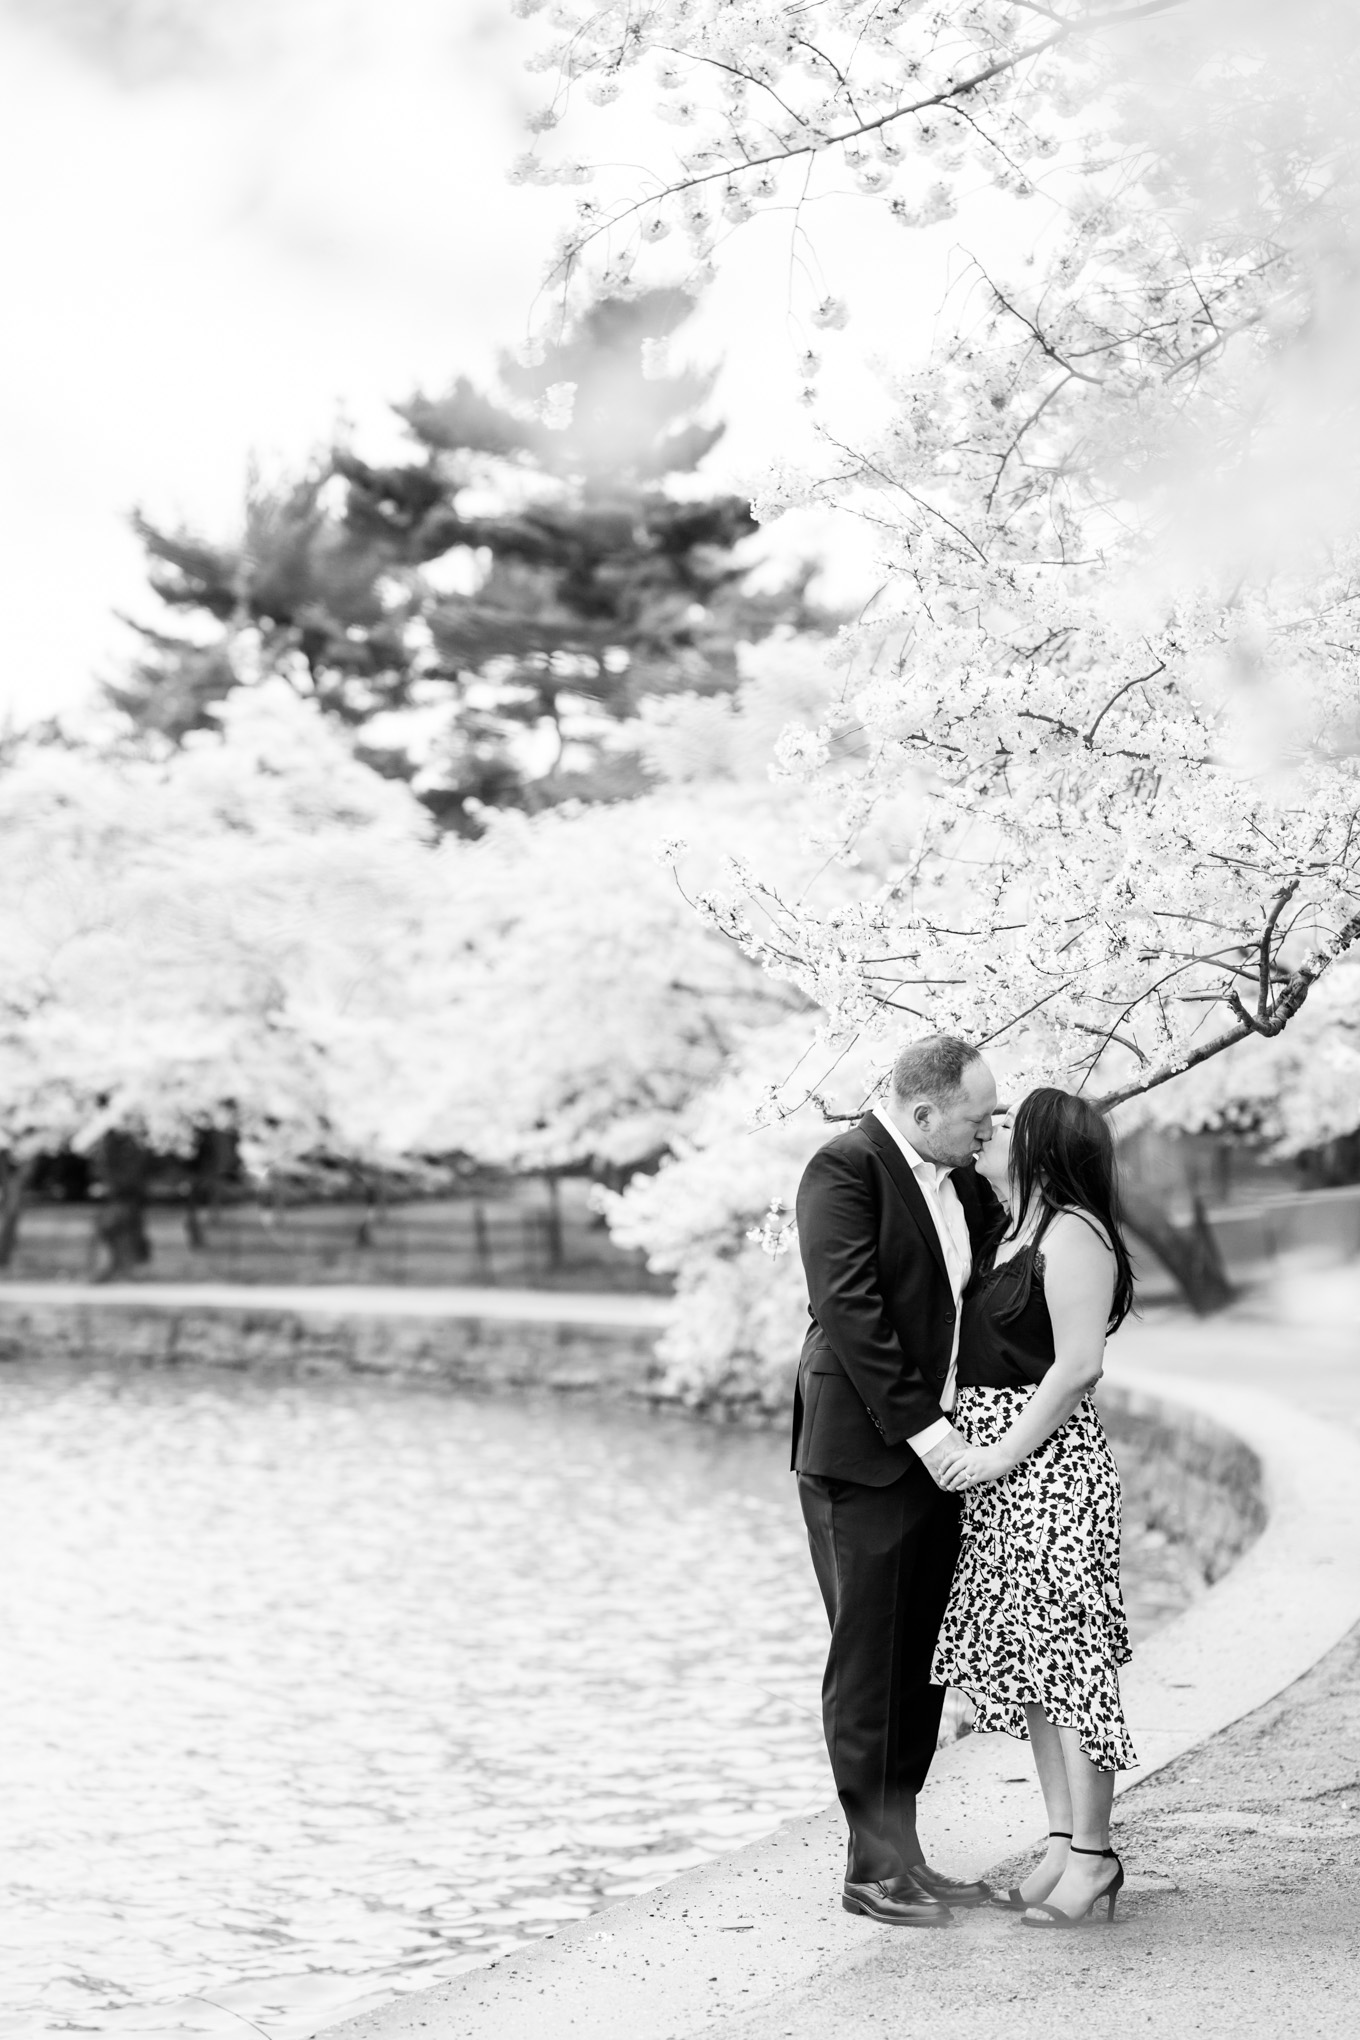 engaged couple, engagement portraits, photo shoot outfit ideas, cherry blossom engagement portraits, cherry blossom portraits, cherry blossoms, DC cherry blossoms, tidal basin, DC tidal basin, white cotton dress, white cotton sleeveless dress, bow sleeves, classic cherry blossom engagement session, D.C. engagement photographer, cherry blossom trees, floral print skirt, black and navy outfit, black and white outfit, black and white photo